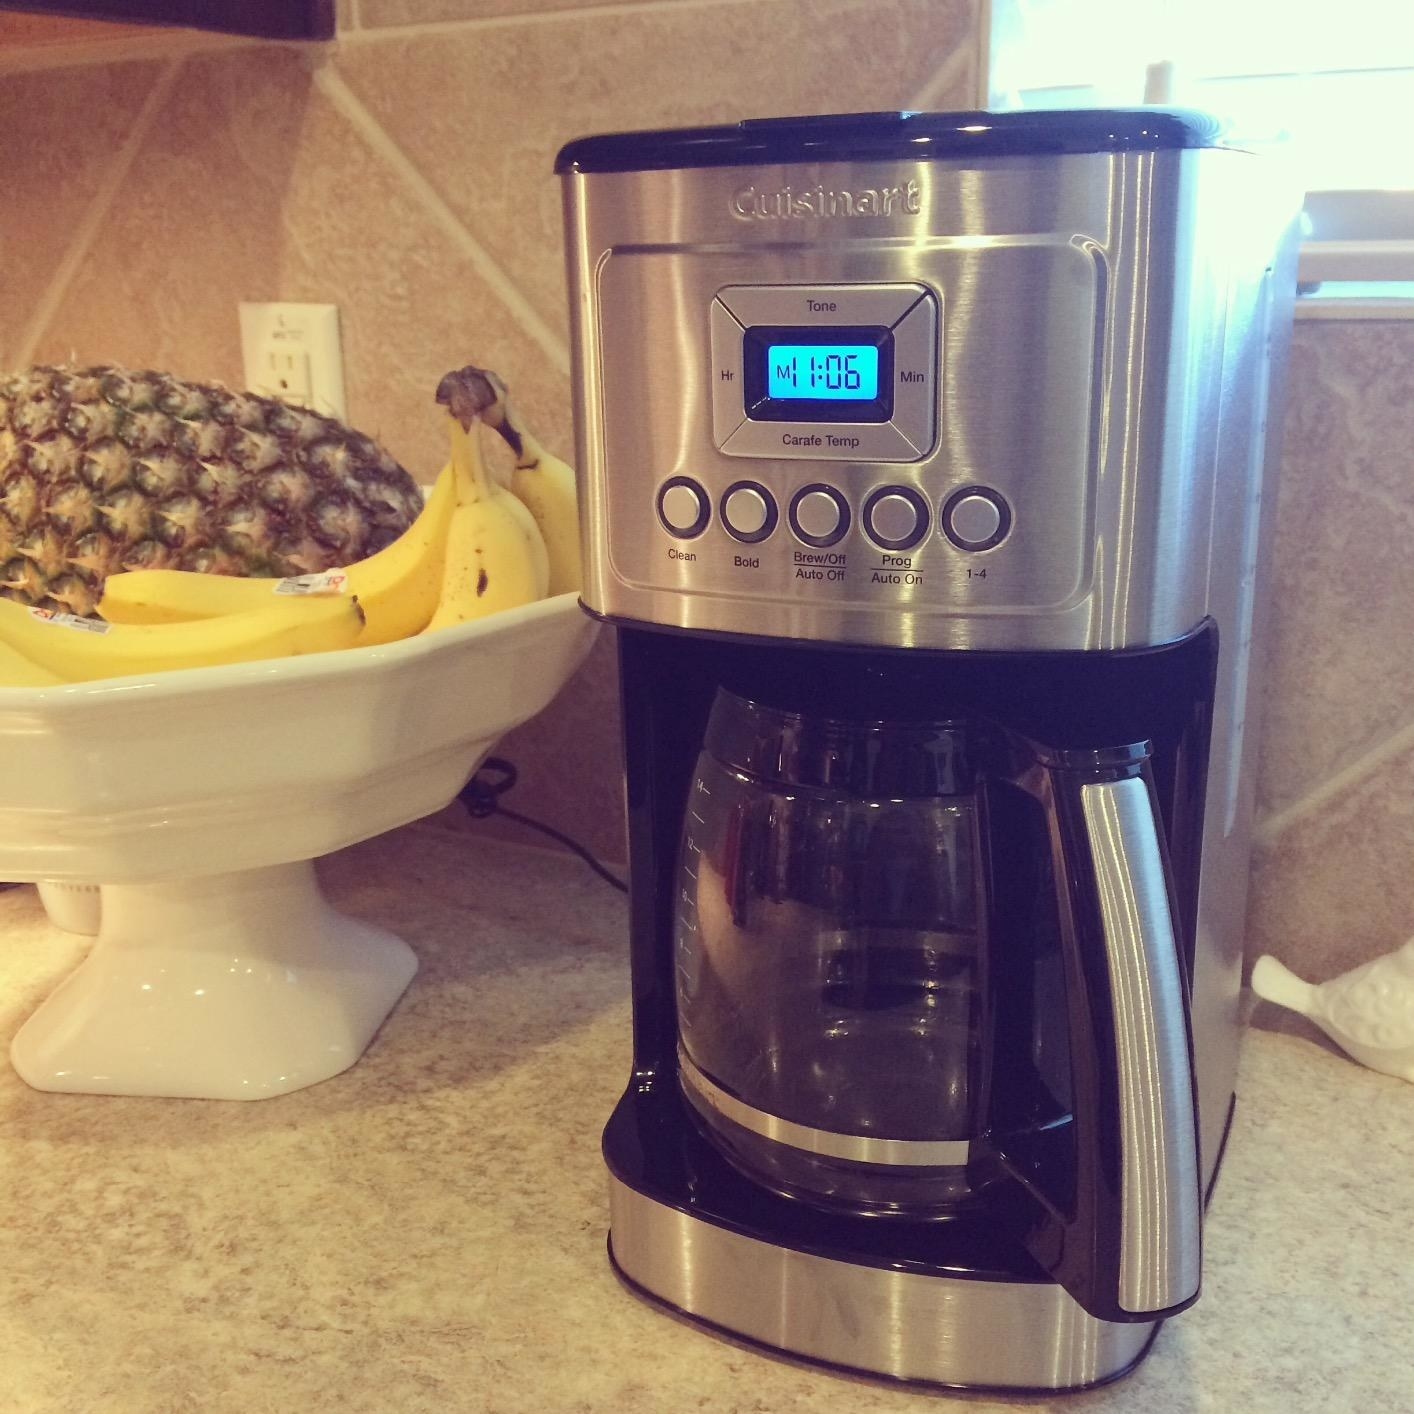 Reviewer image of coffeemaker on a countertop next to a bowl of fruit